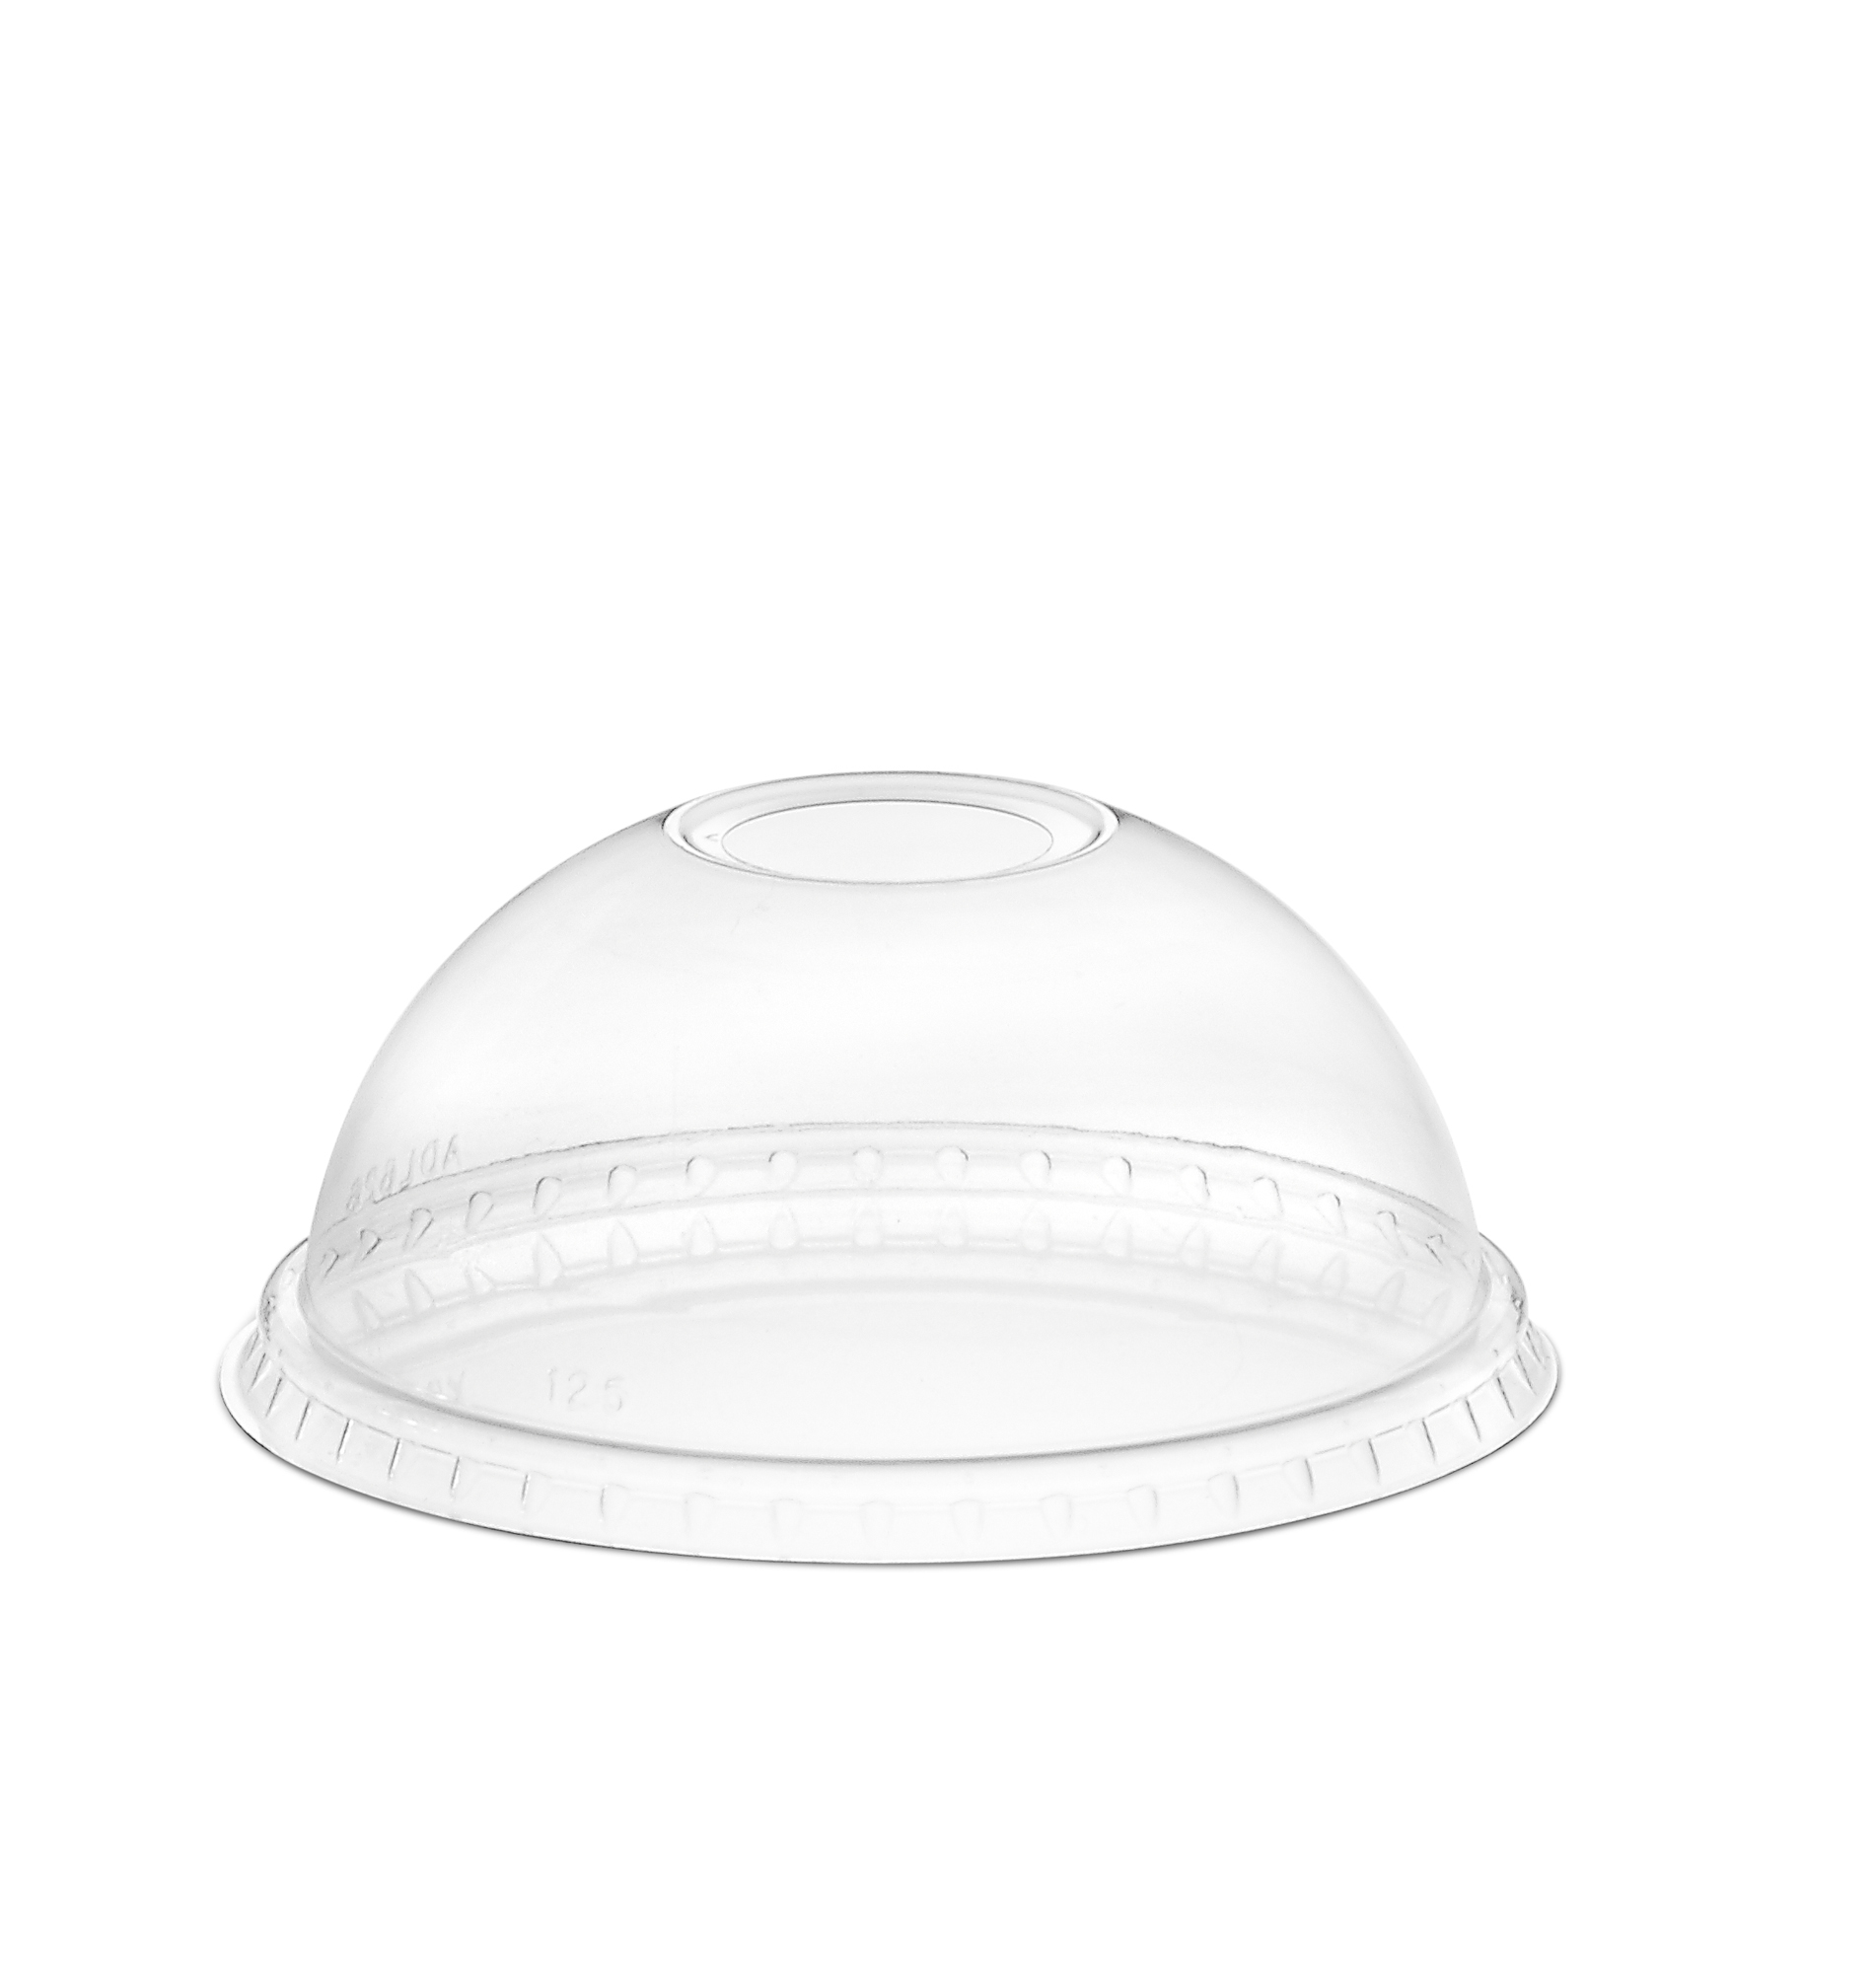 clear drinking cup dome lid with straw hole